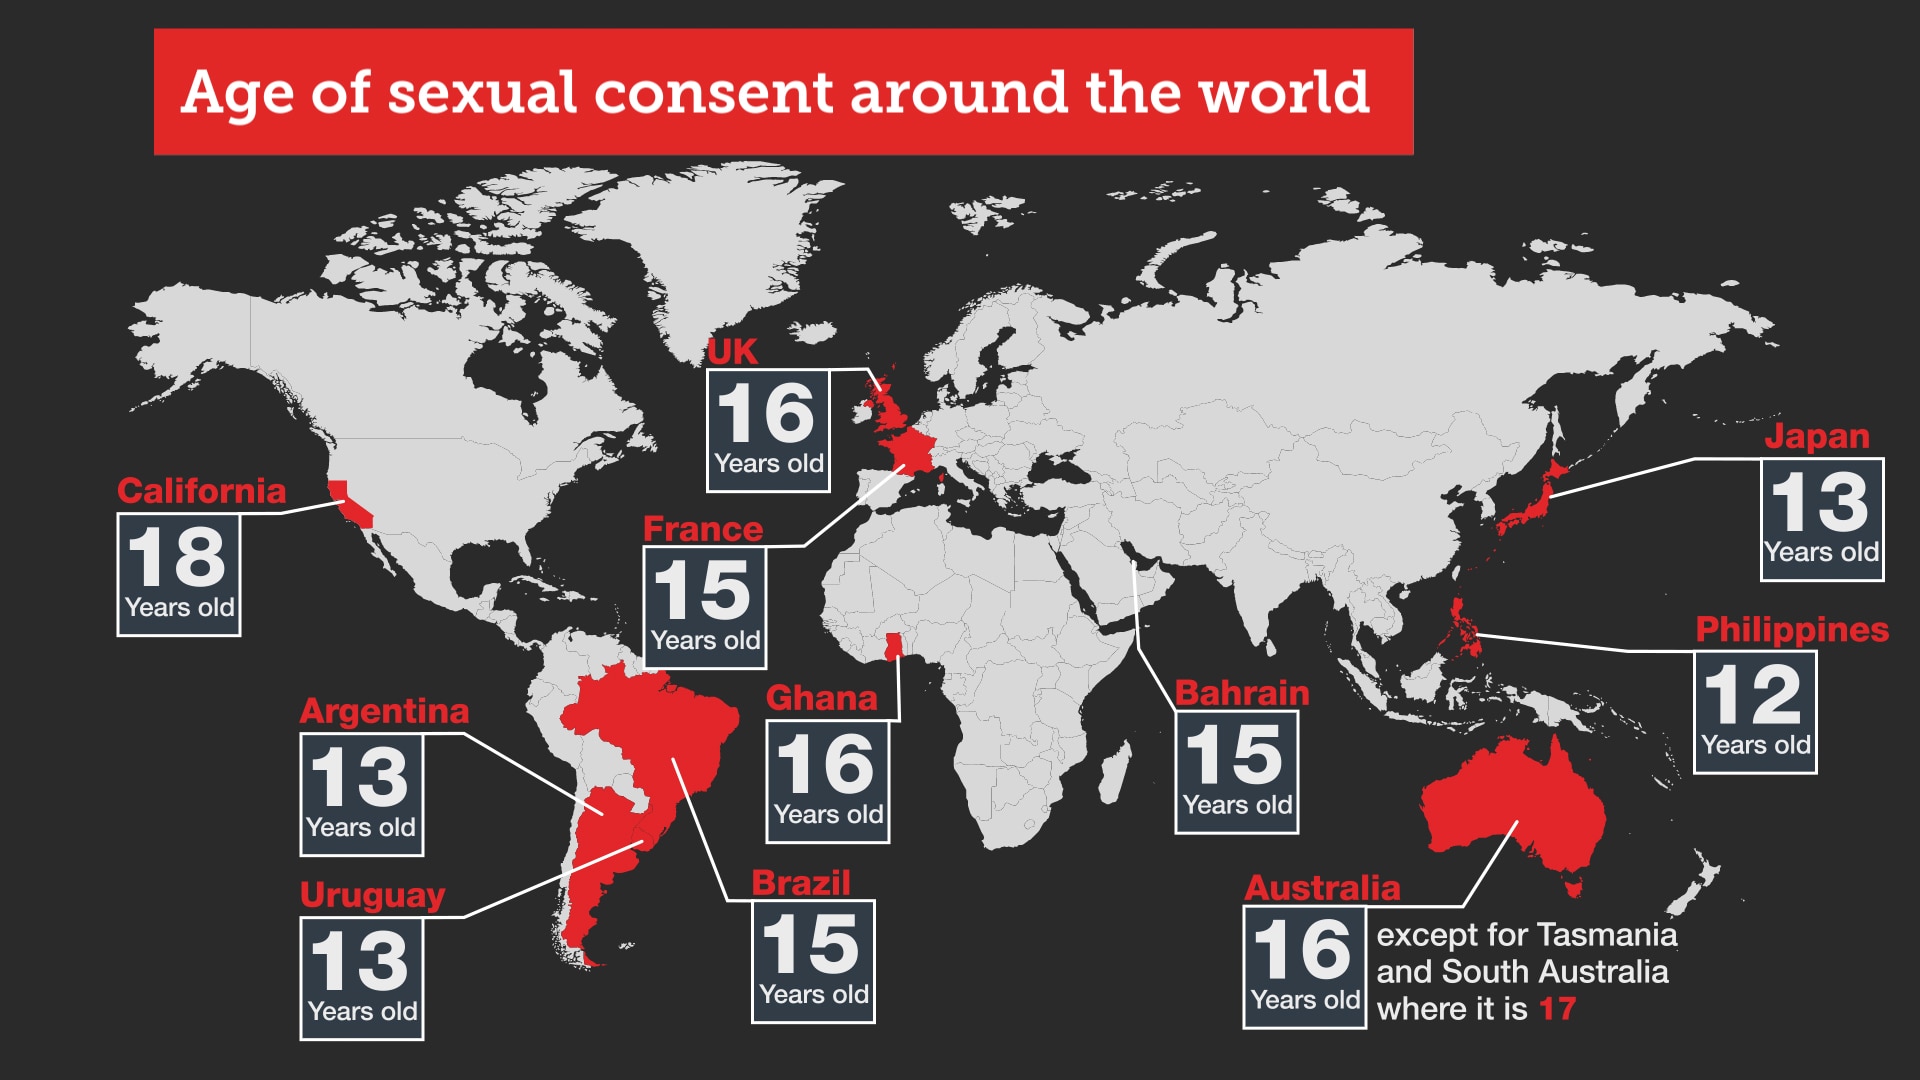 Youngest age of consent in the world